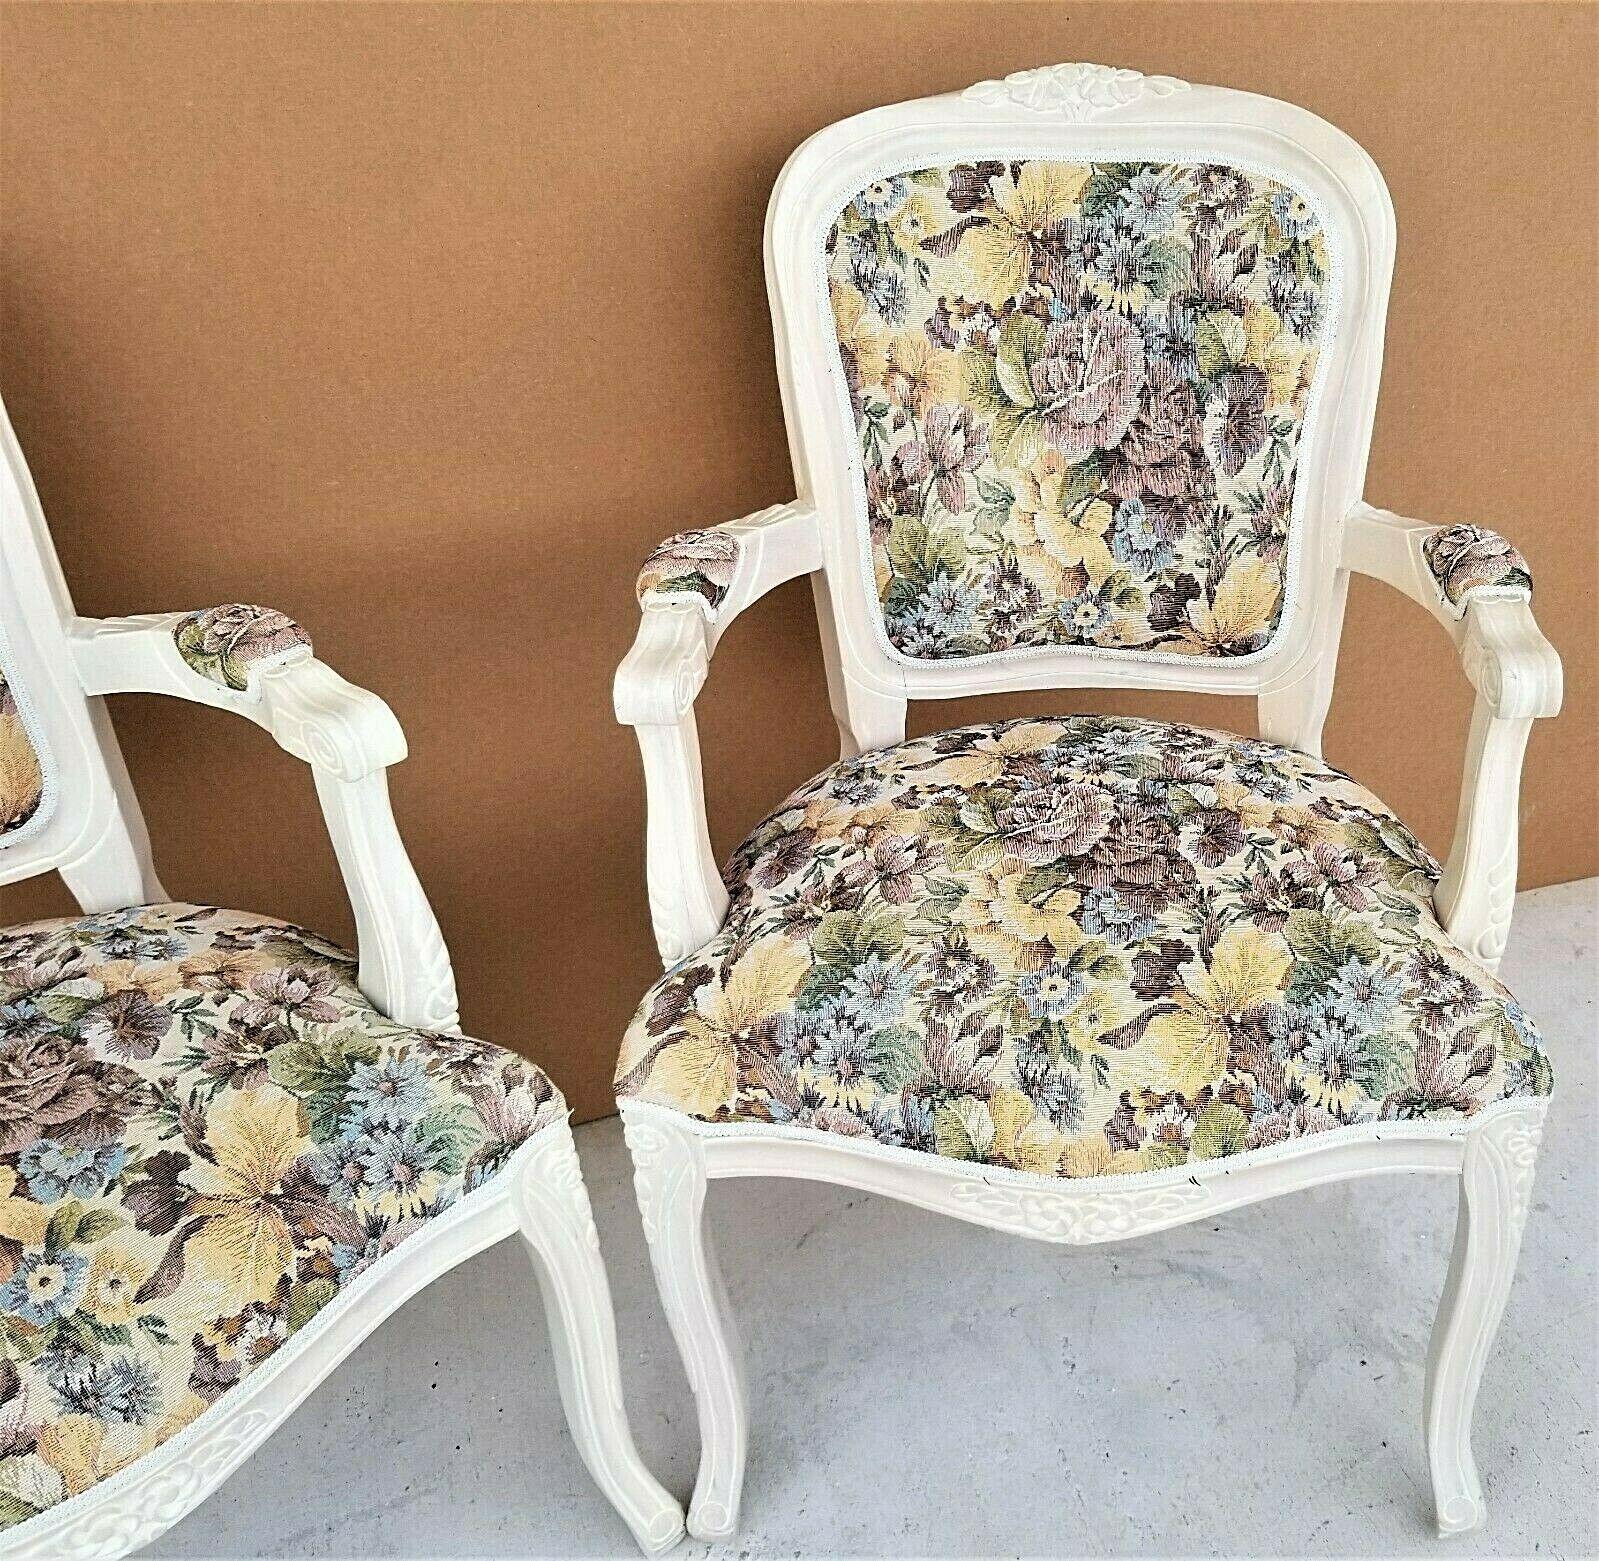 French Provincial Pearled Fauteuil Floral Tapestry Armchairs In Good Condition For Sale In Lake Worth, FL